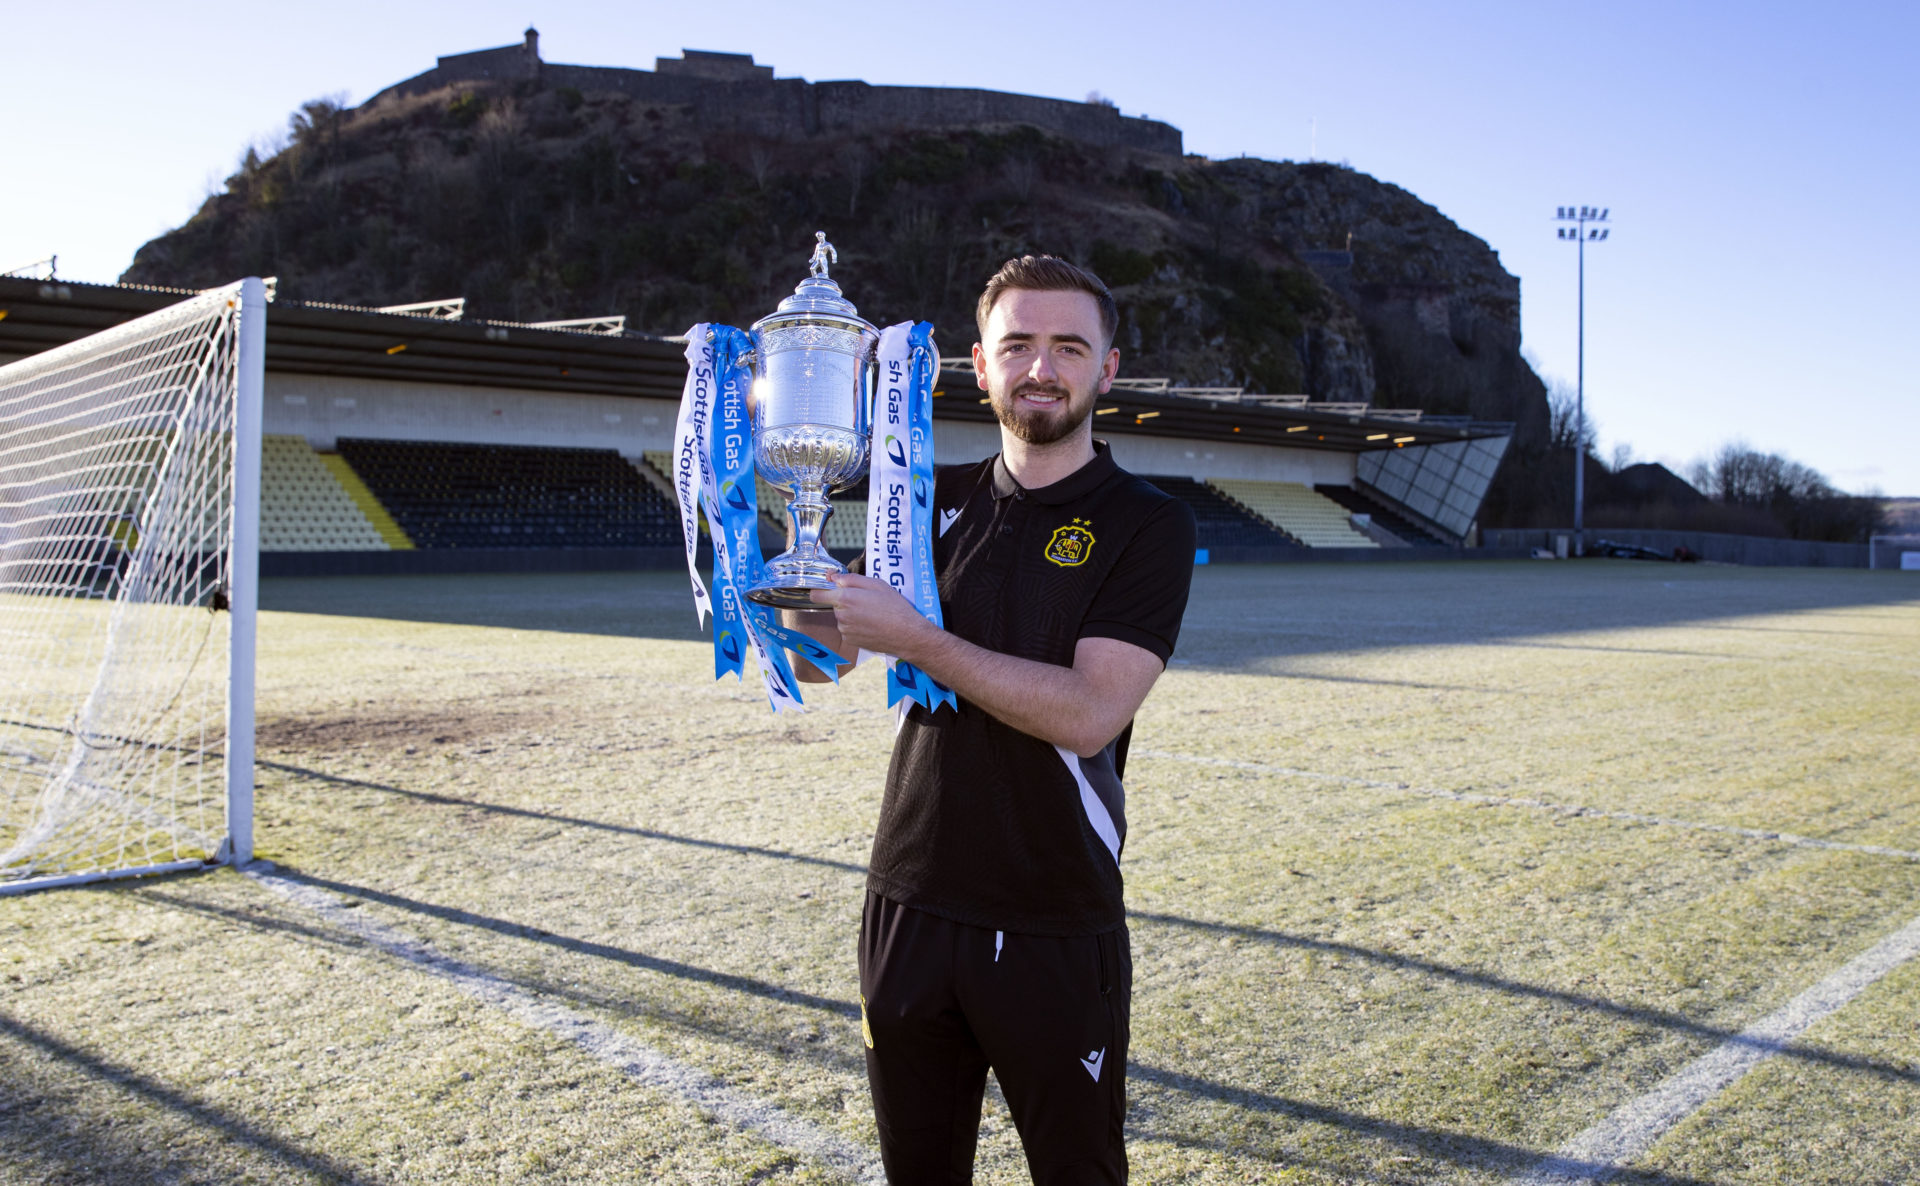 Celtic fan James Hilton hopes to knock Rangers out of the Scottish Cup